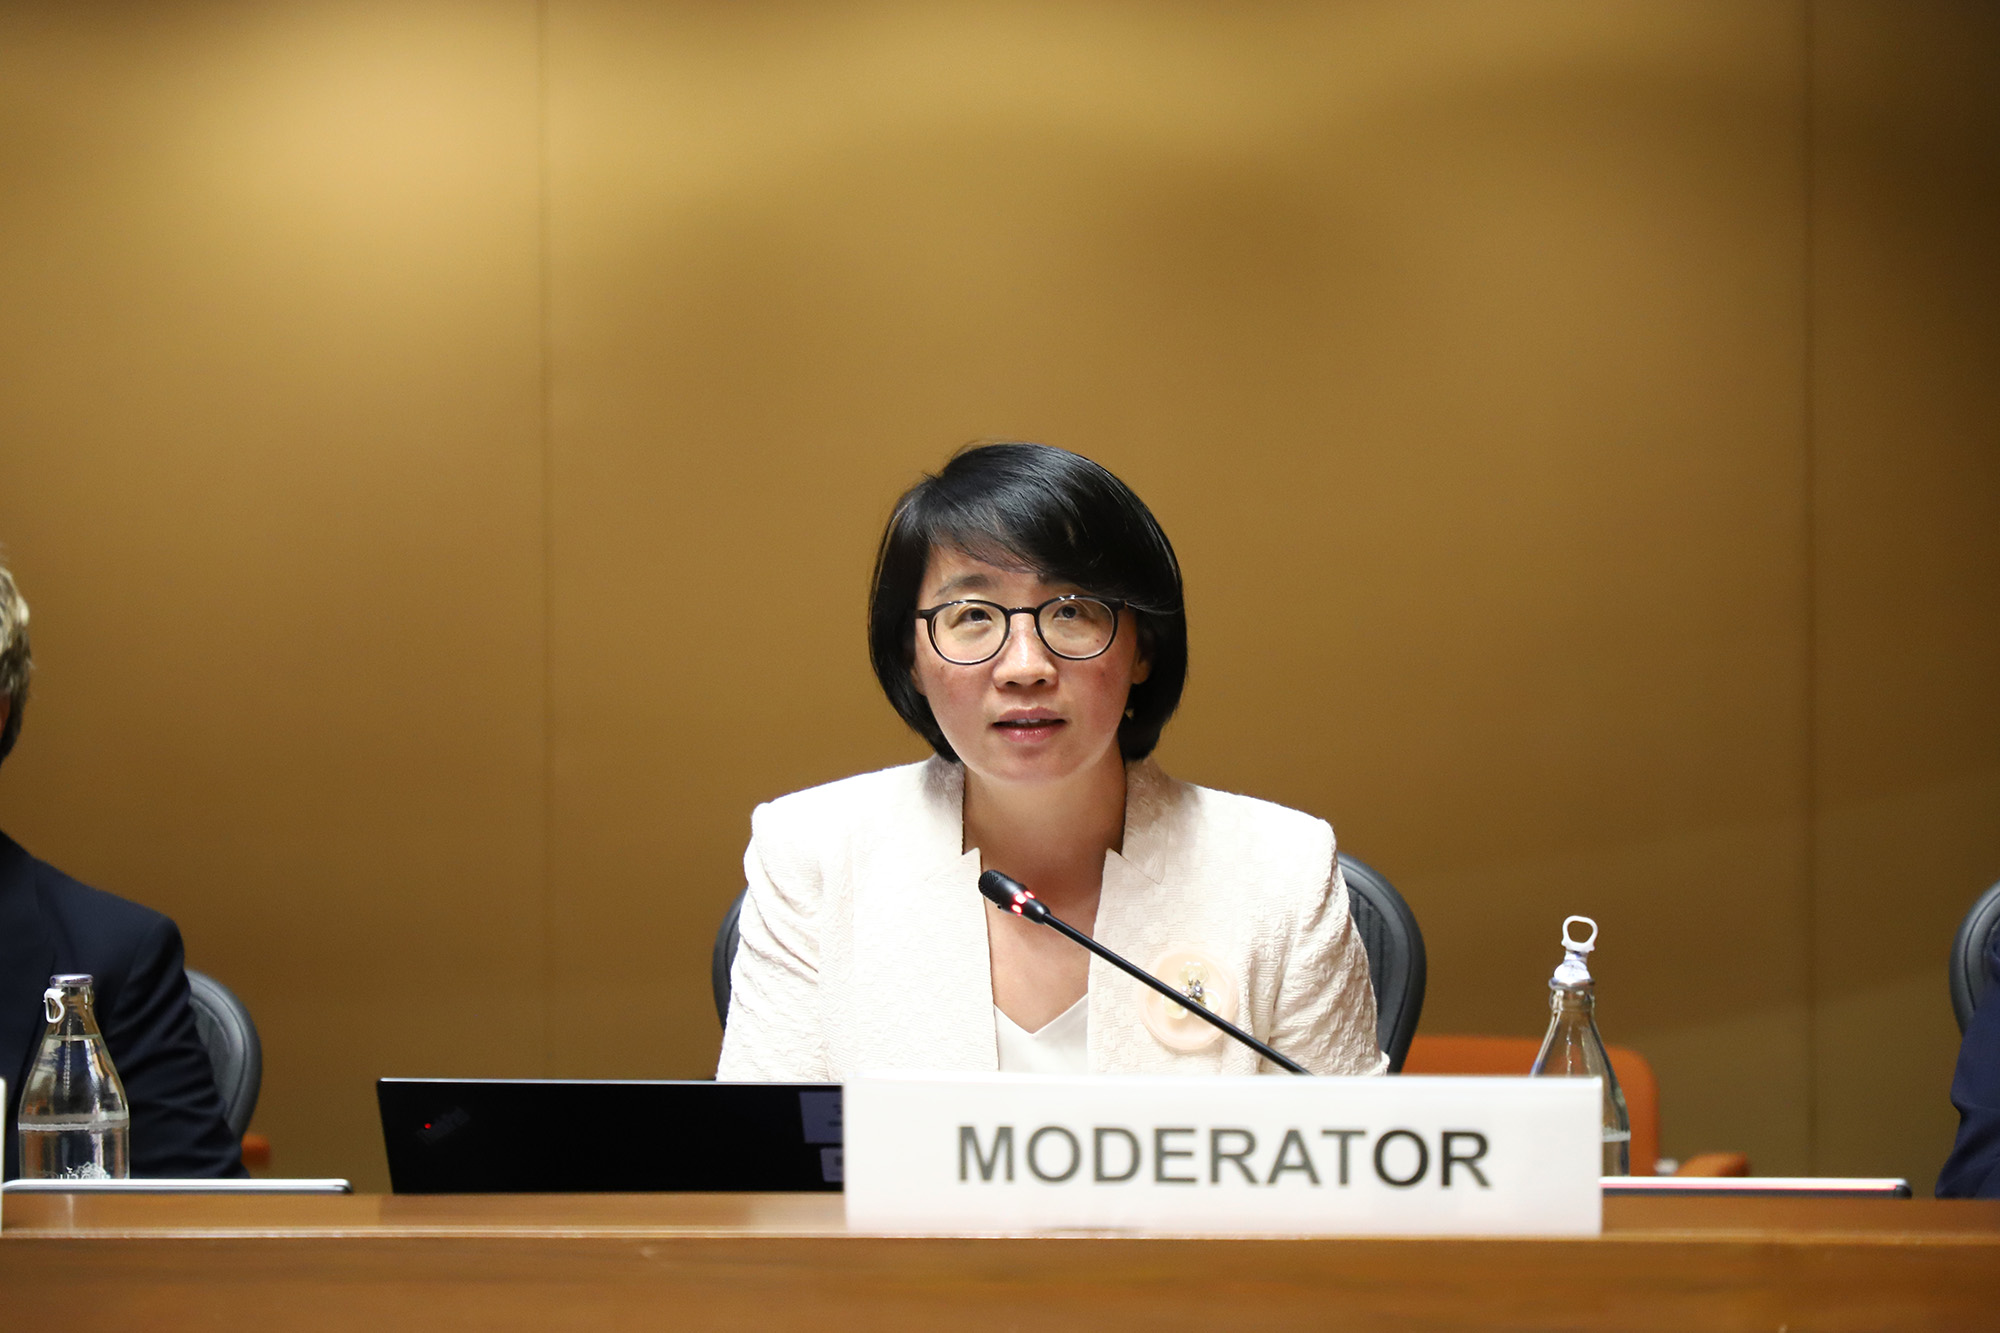 Lili Sang of UNODC moderates a session on regional cooperation platforms